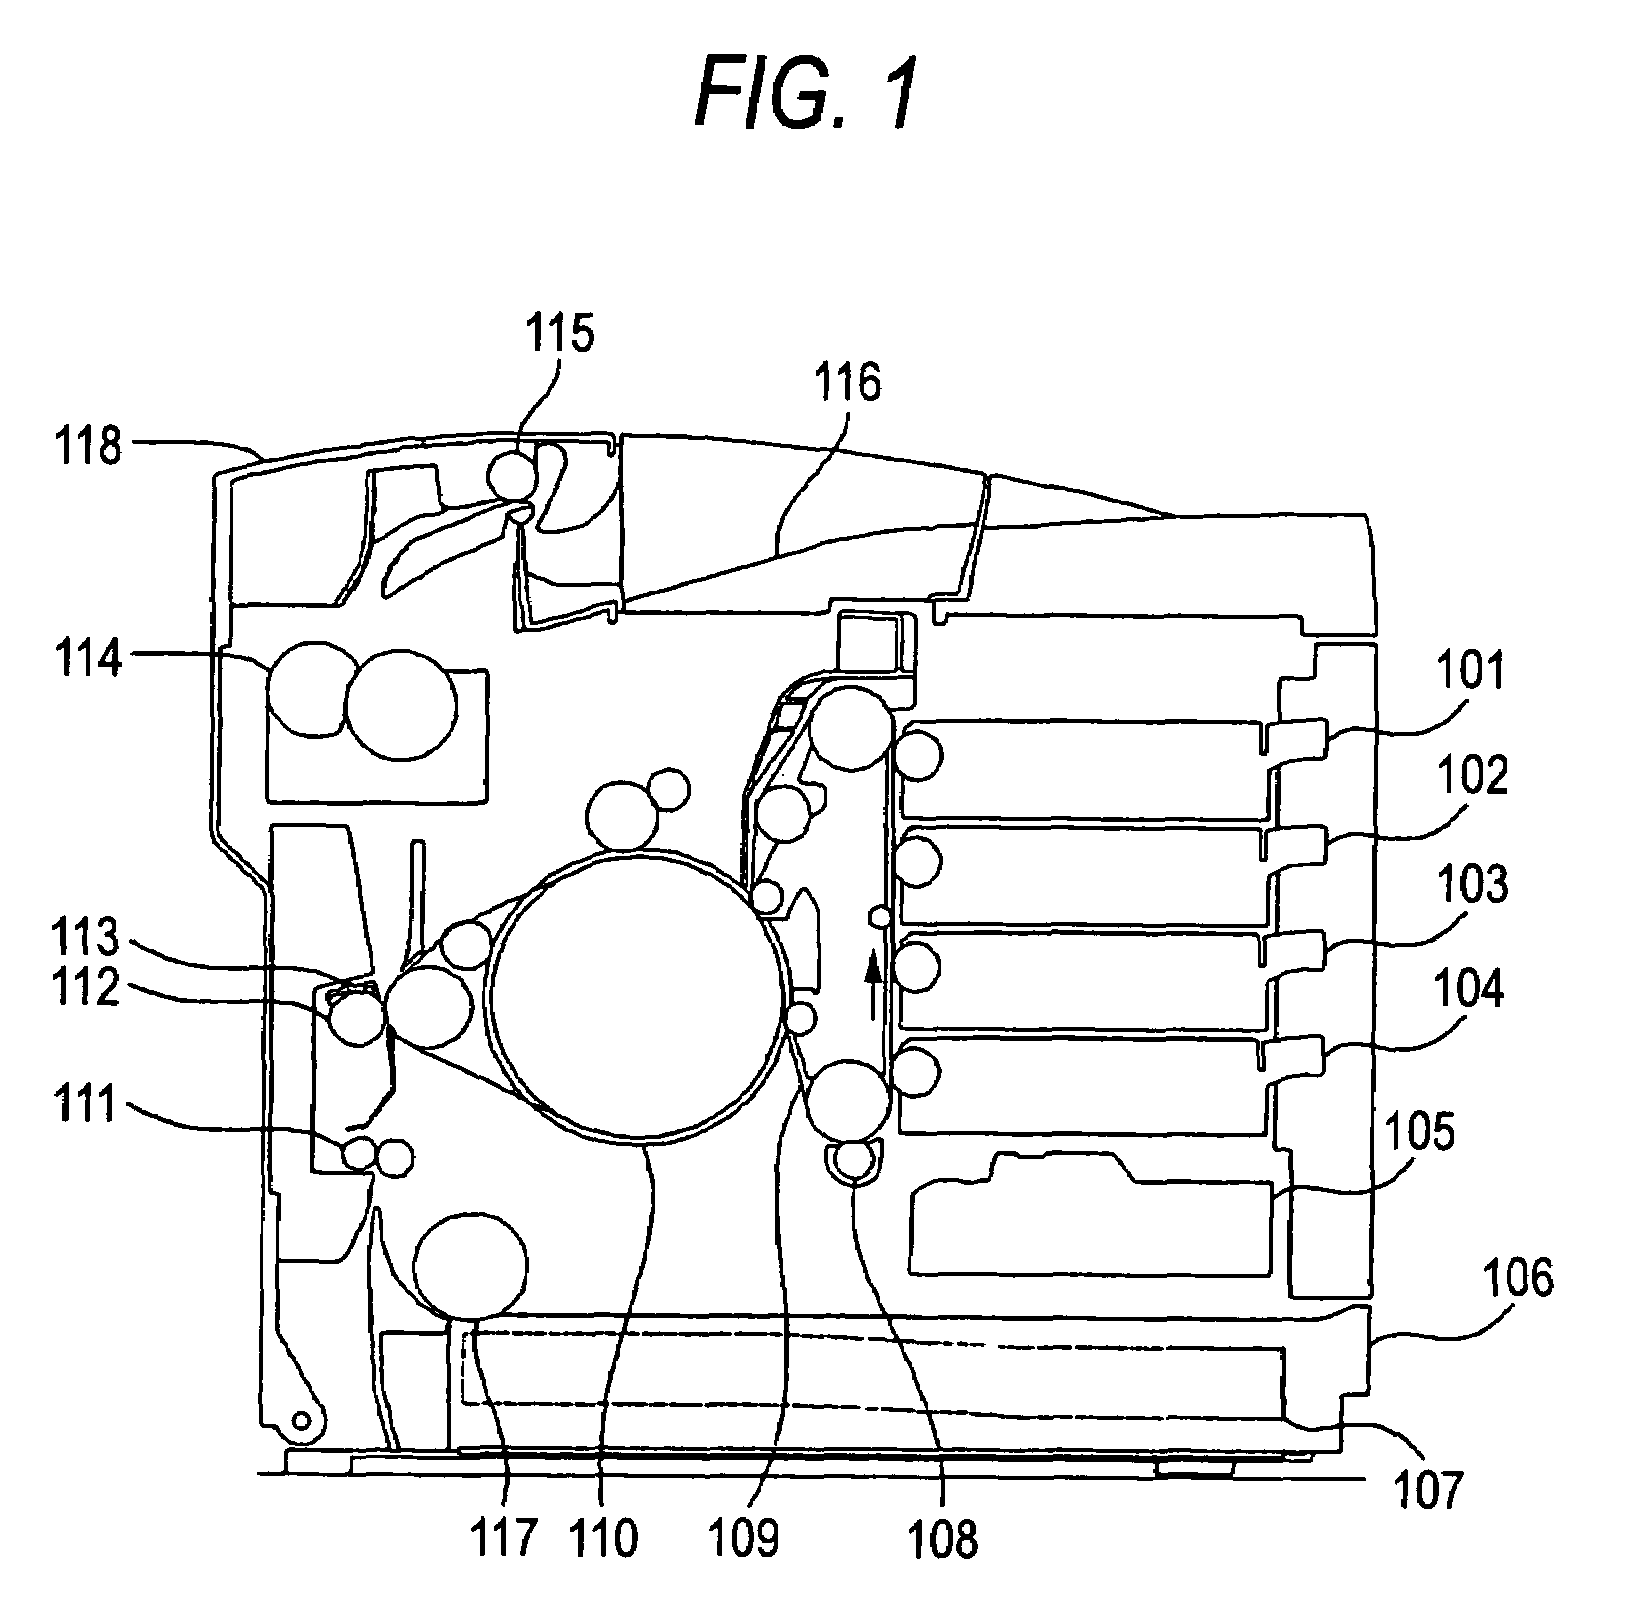 Image forming apparatus having a sheet removal portion